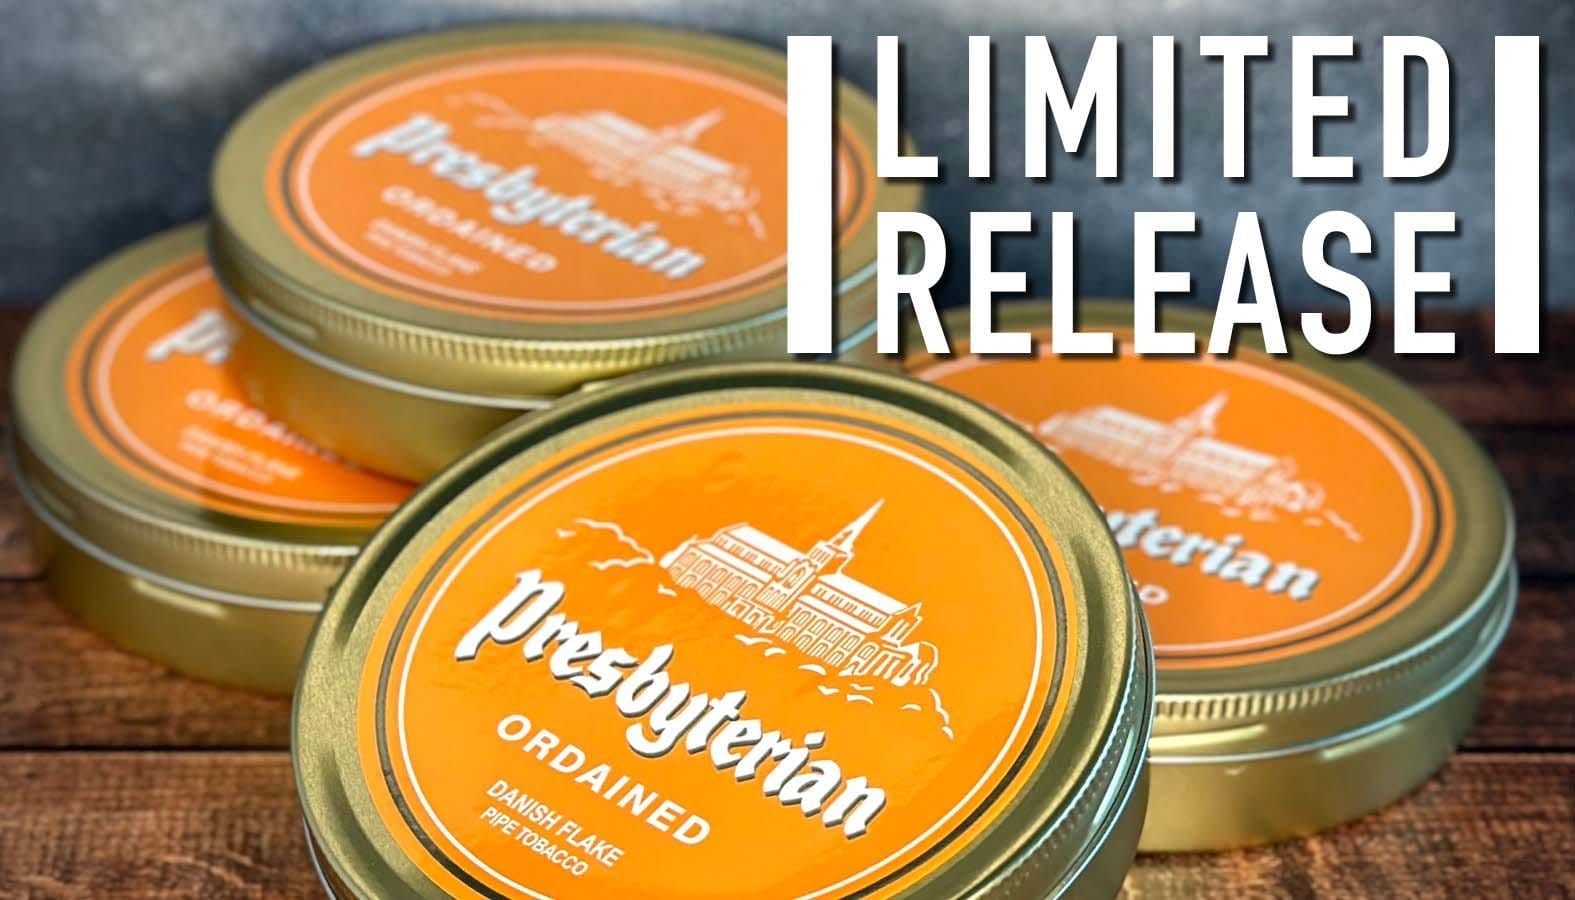 Limited Release Presbyterian Ordained Pipe Tobacco